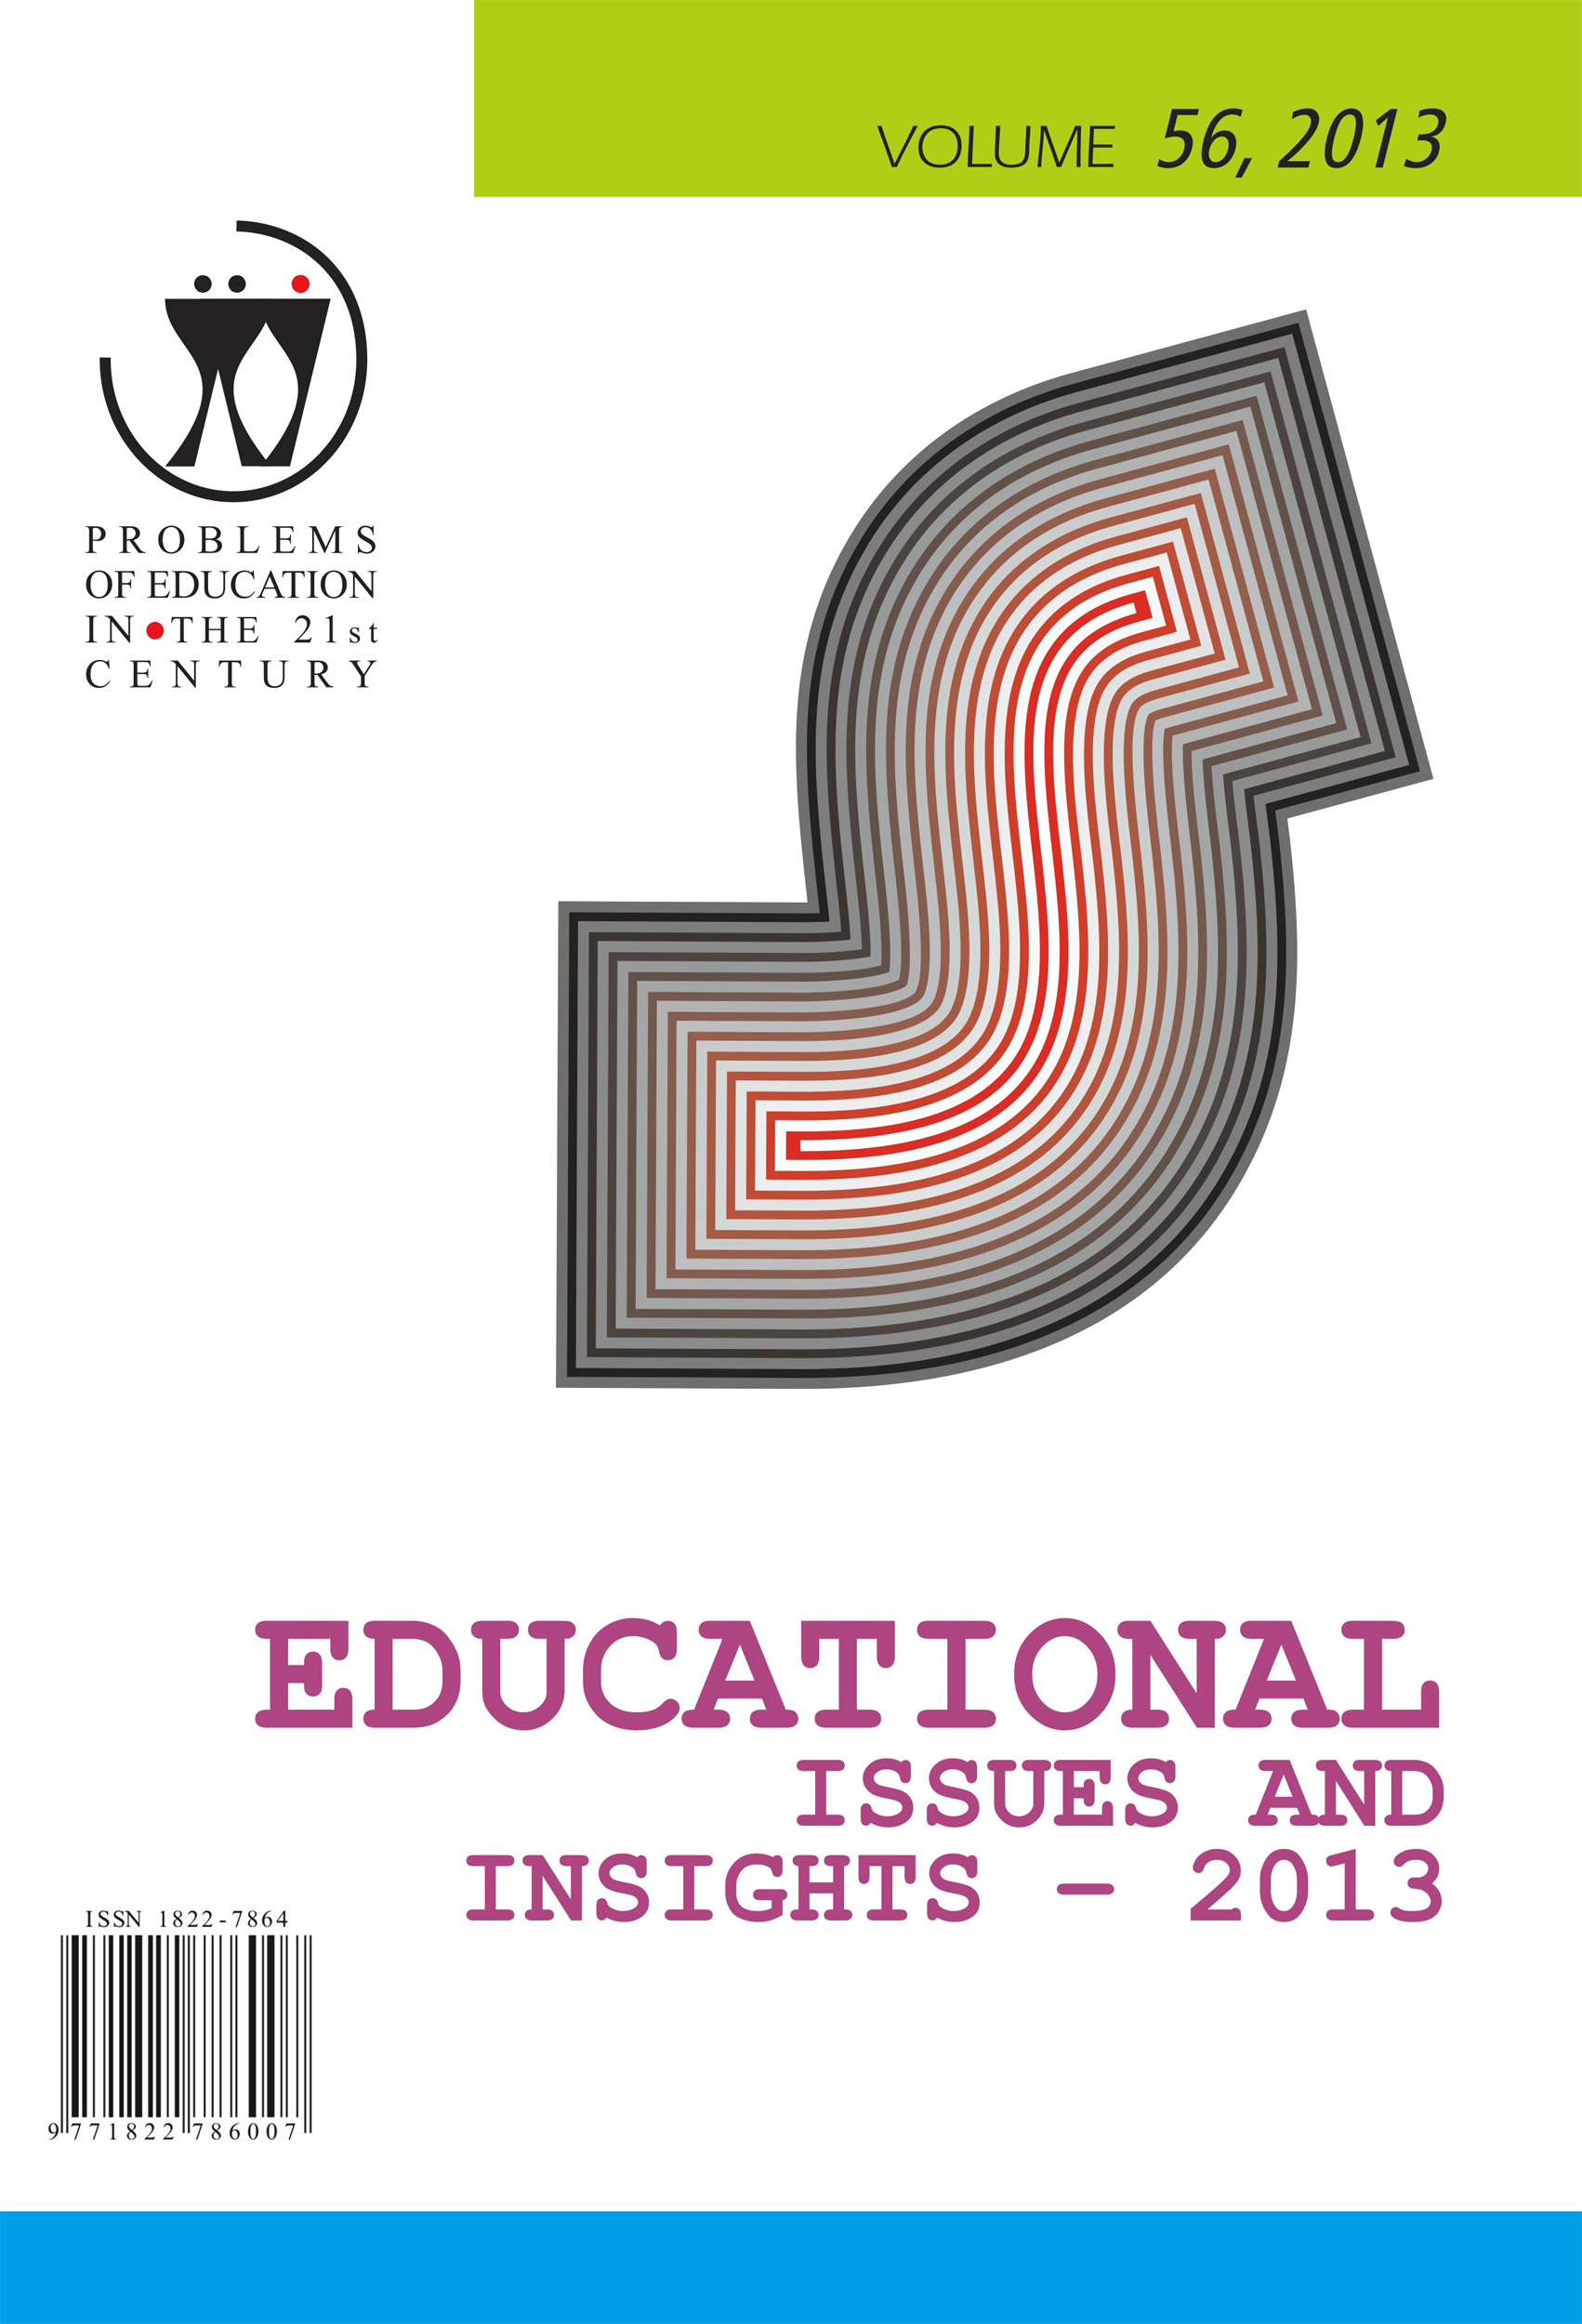 UNDERSTANDING THE WEAKNESSES AND THE THREATS OF CONTINUOUS MEDICAL EDUCATION IN THE 21st CENTURY Cover Image